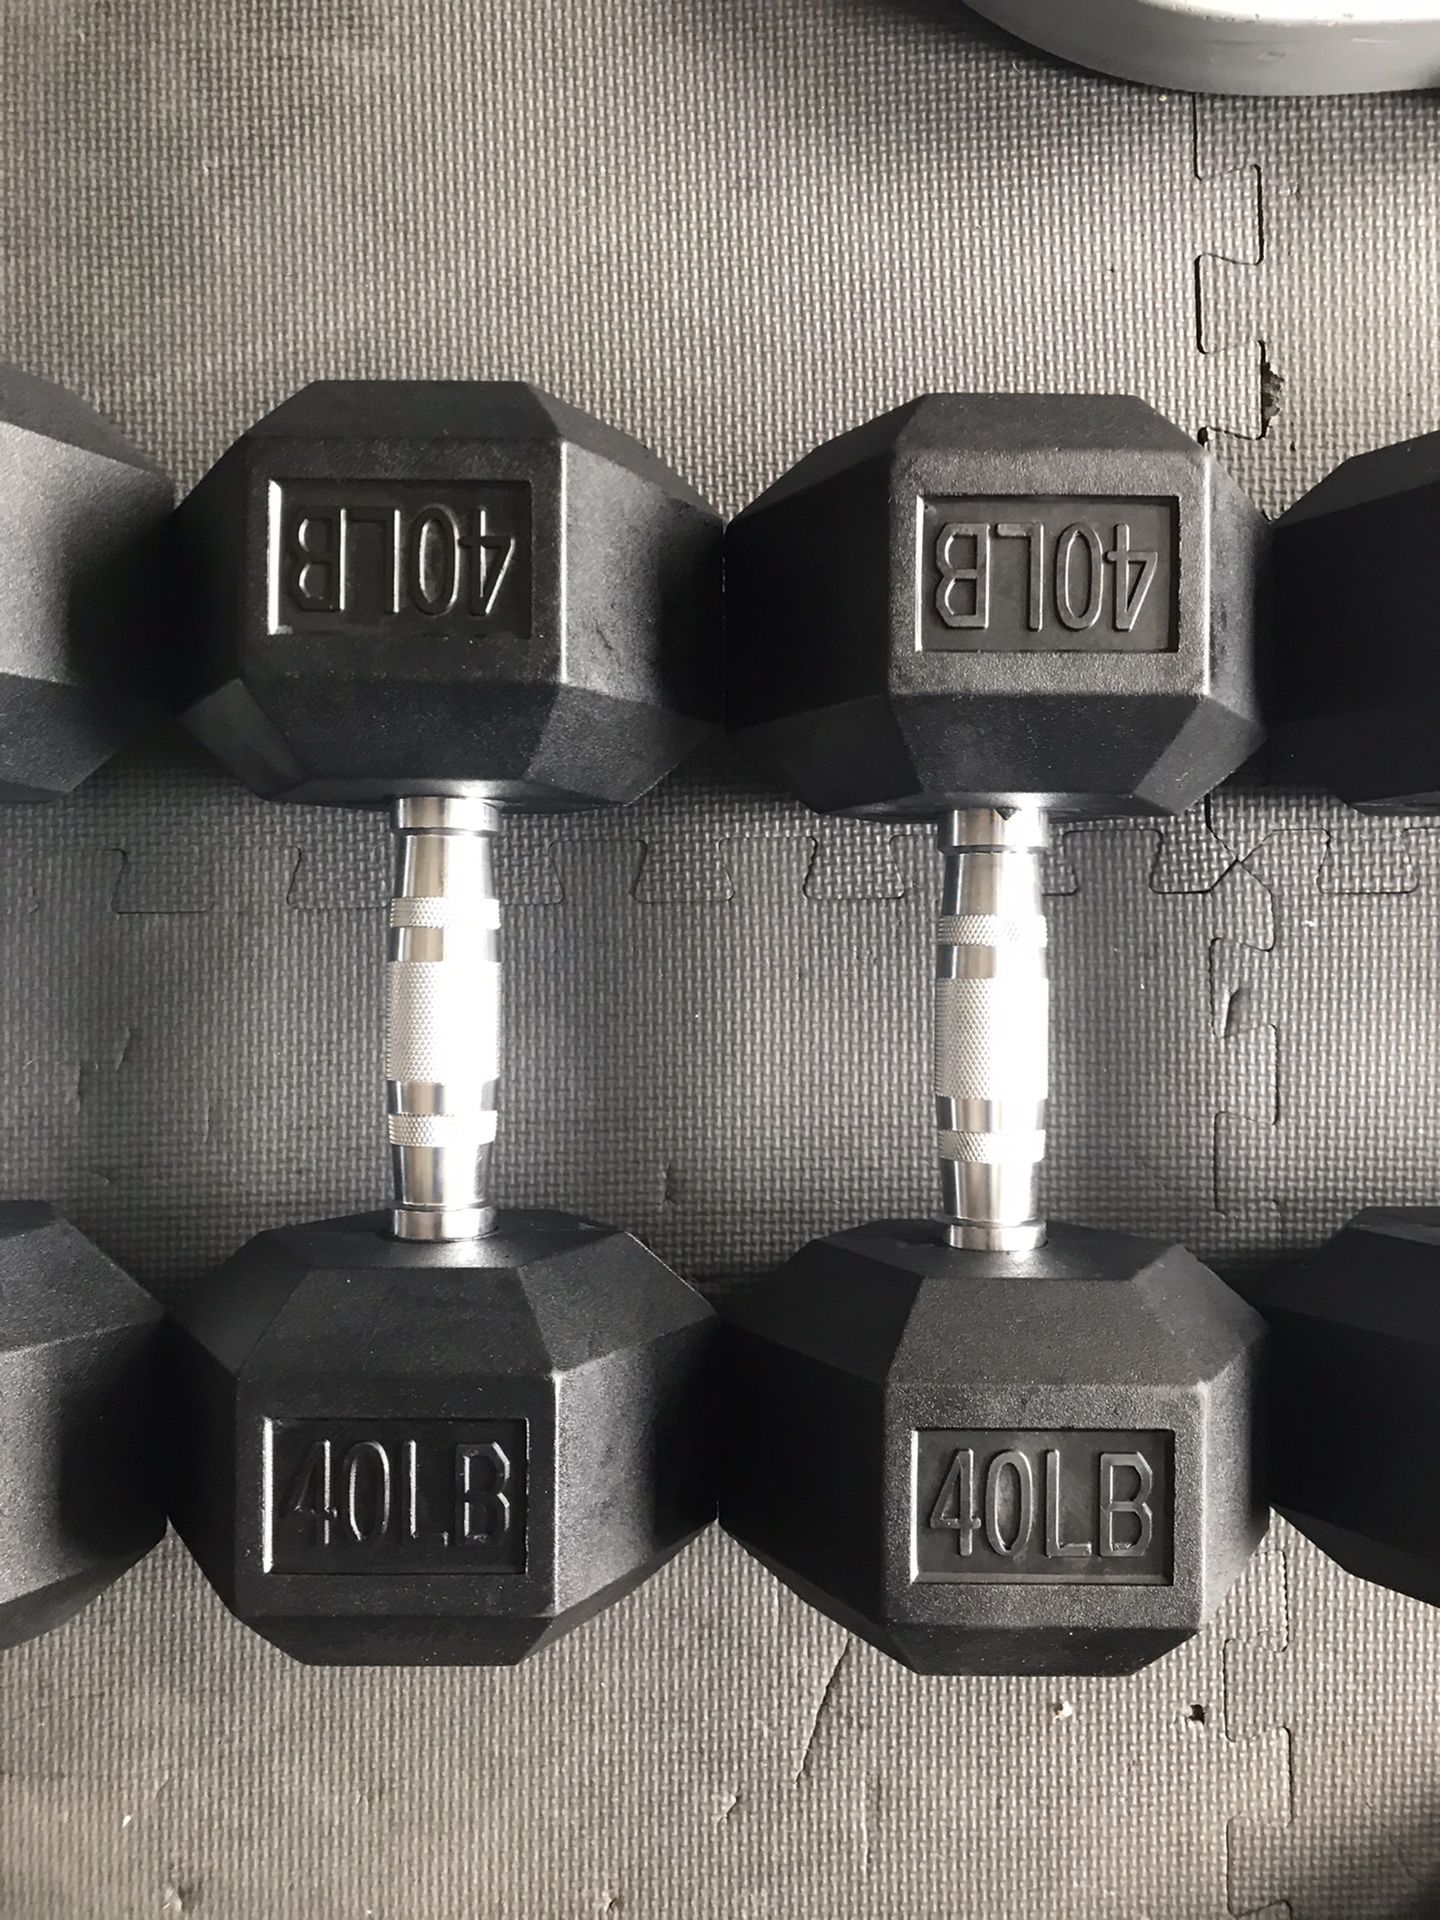 Hex Dumbbells 💪 (2x40Lbs) for $60 Firm on Price.